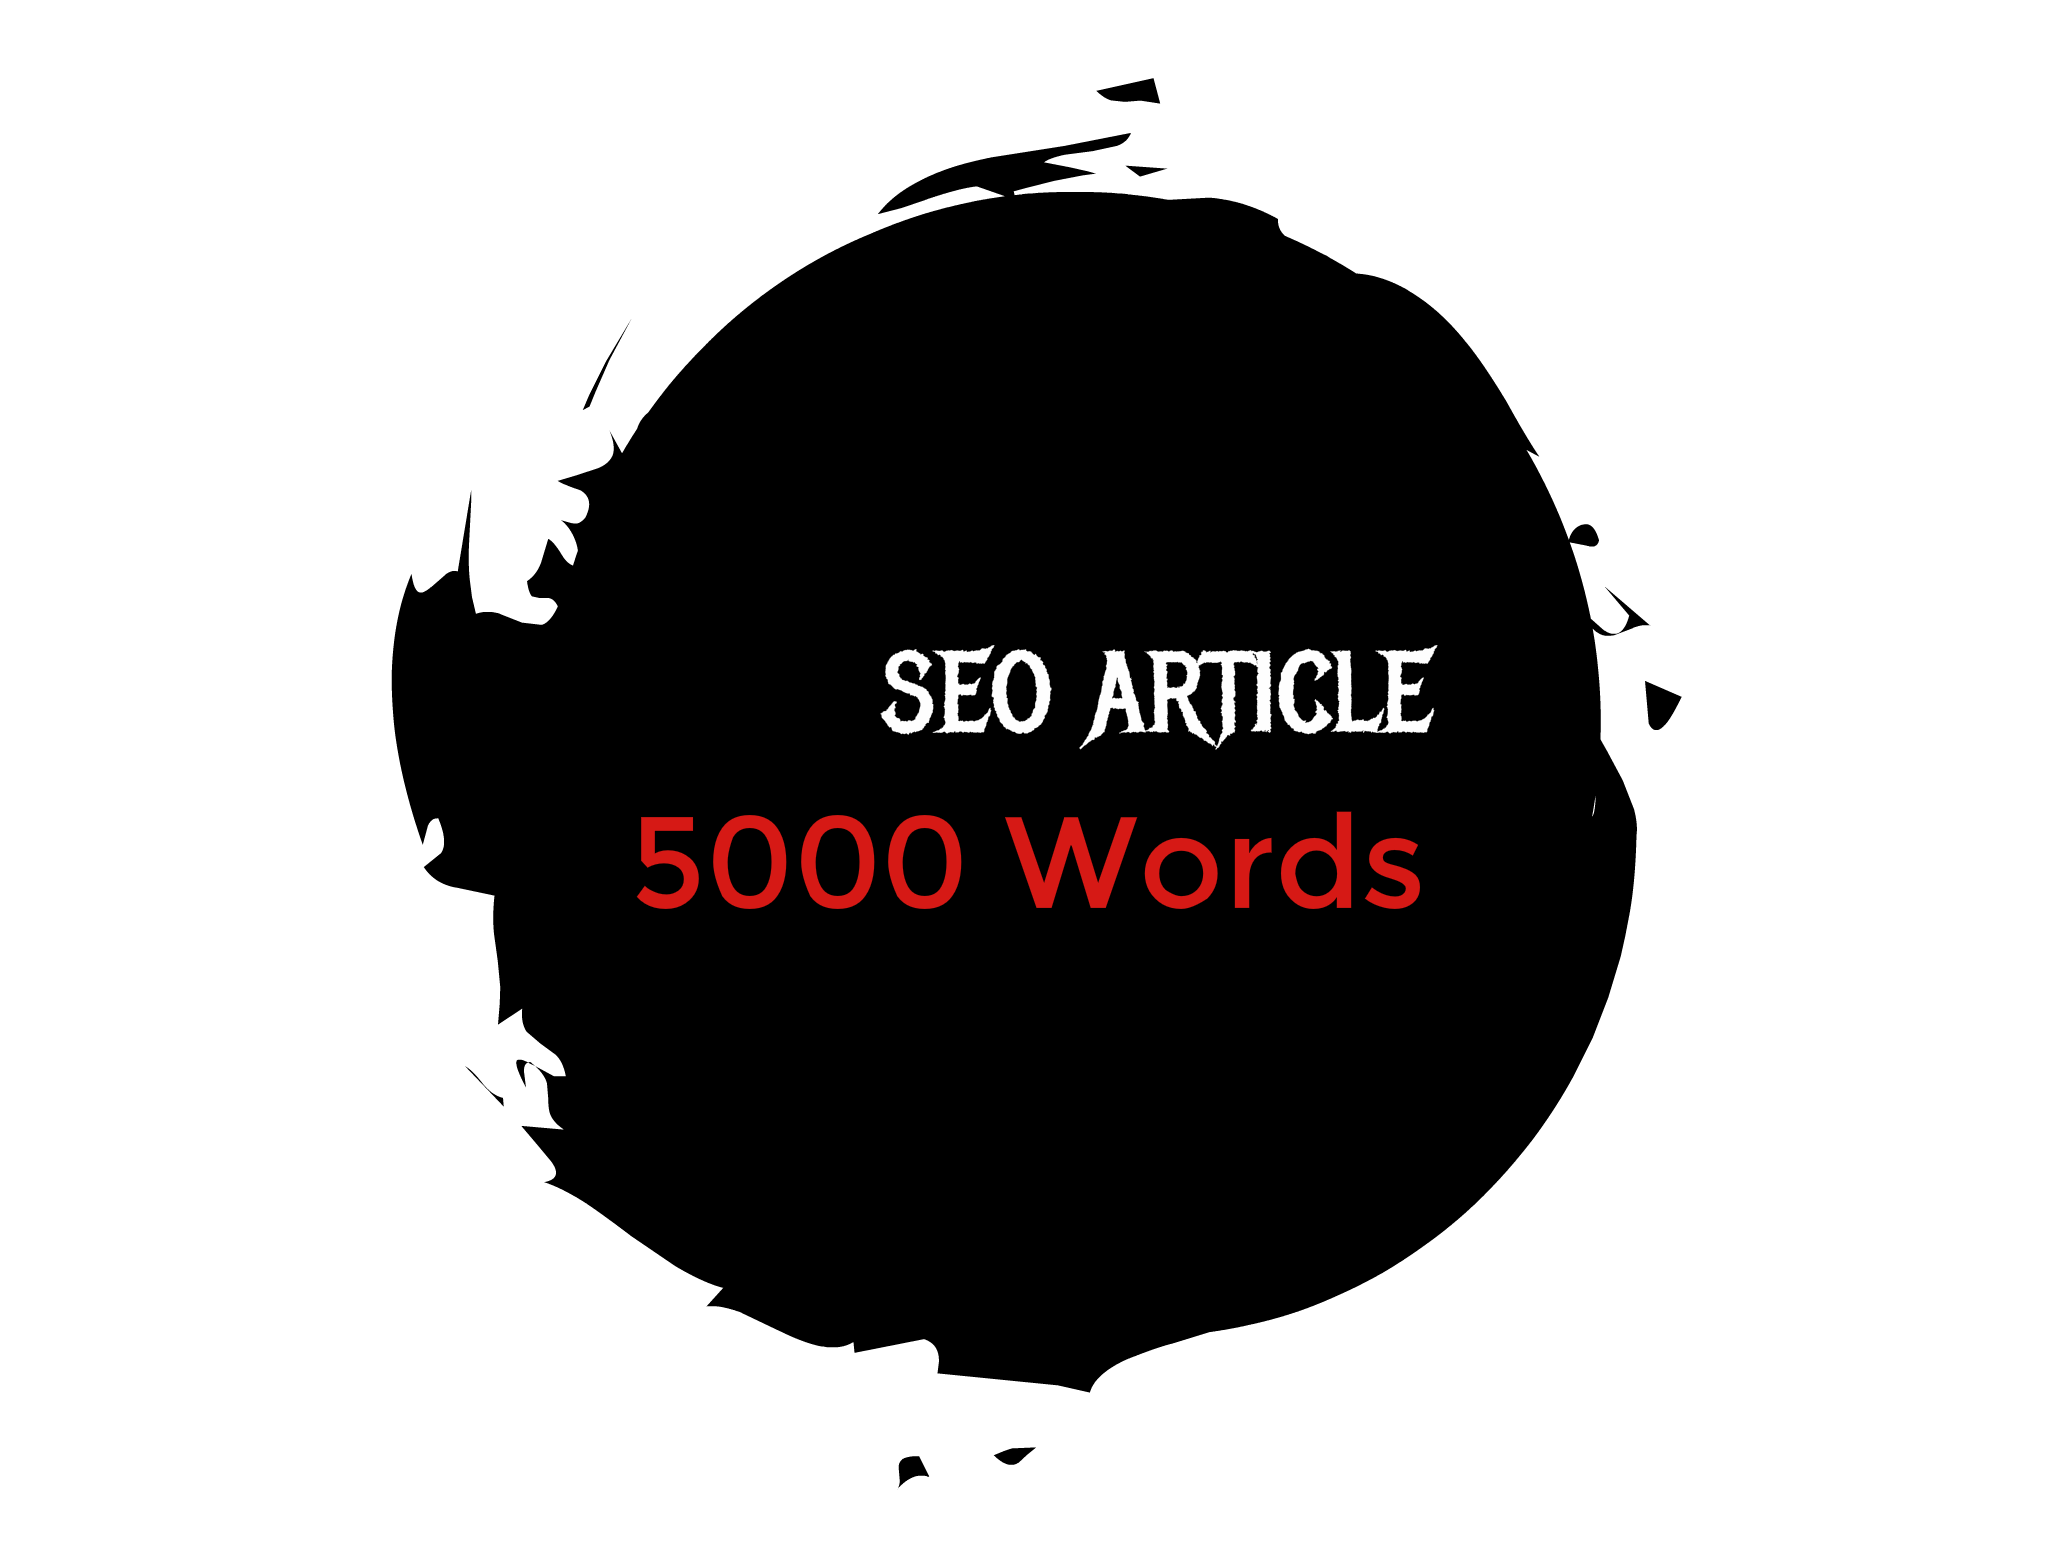 SEO Article 5000 Words